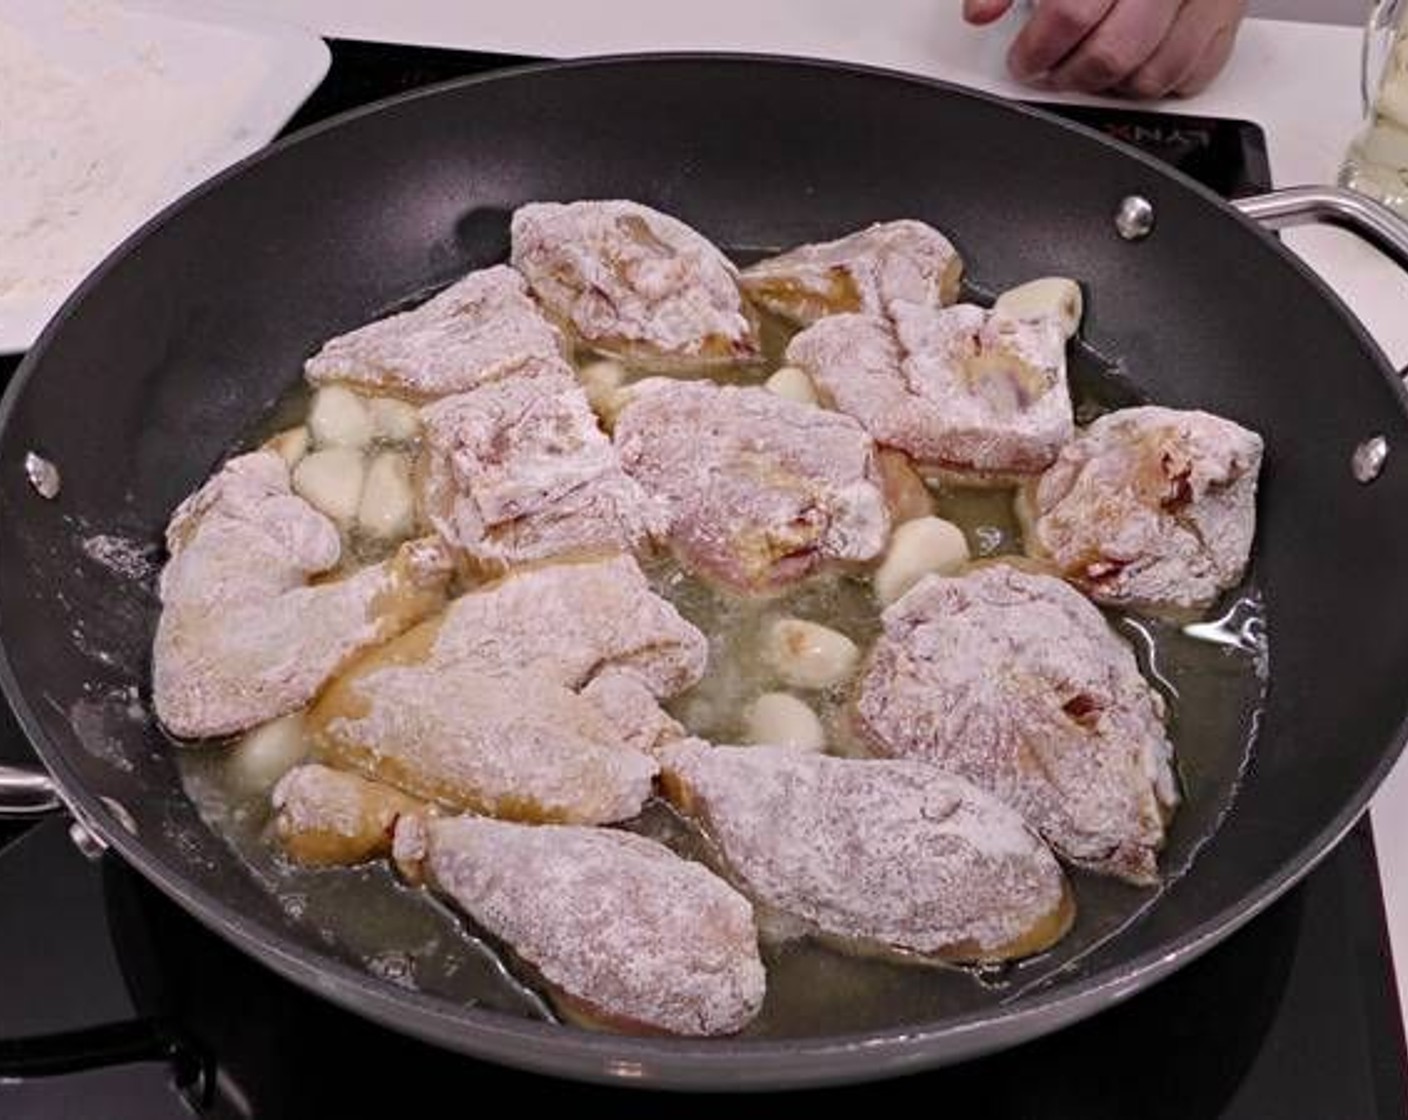 step 3 Next, coat the chicken pieces in All-Purpose Flour (to taste) and place them in the pan alongside the garlic.